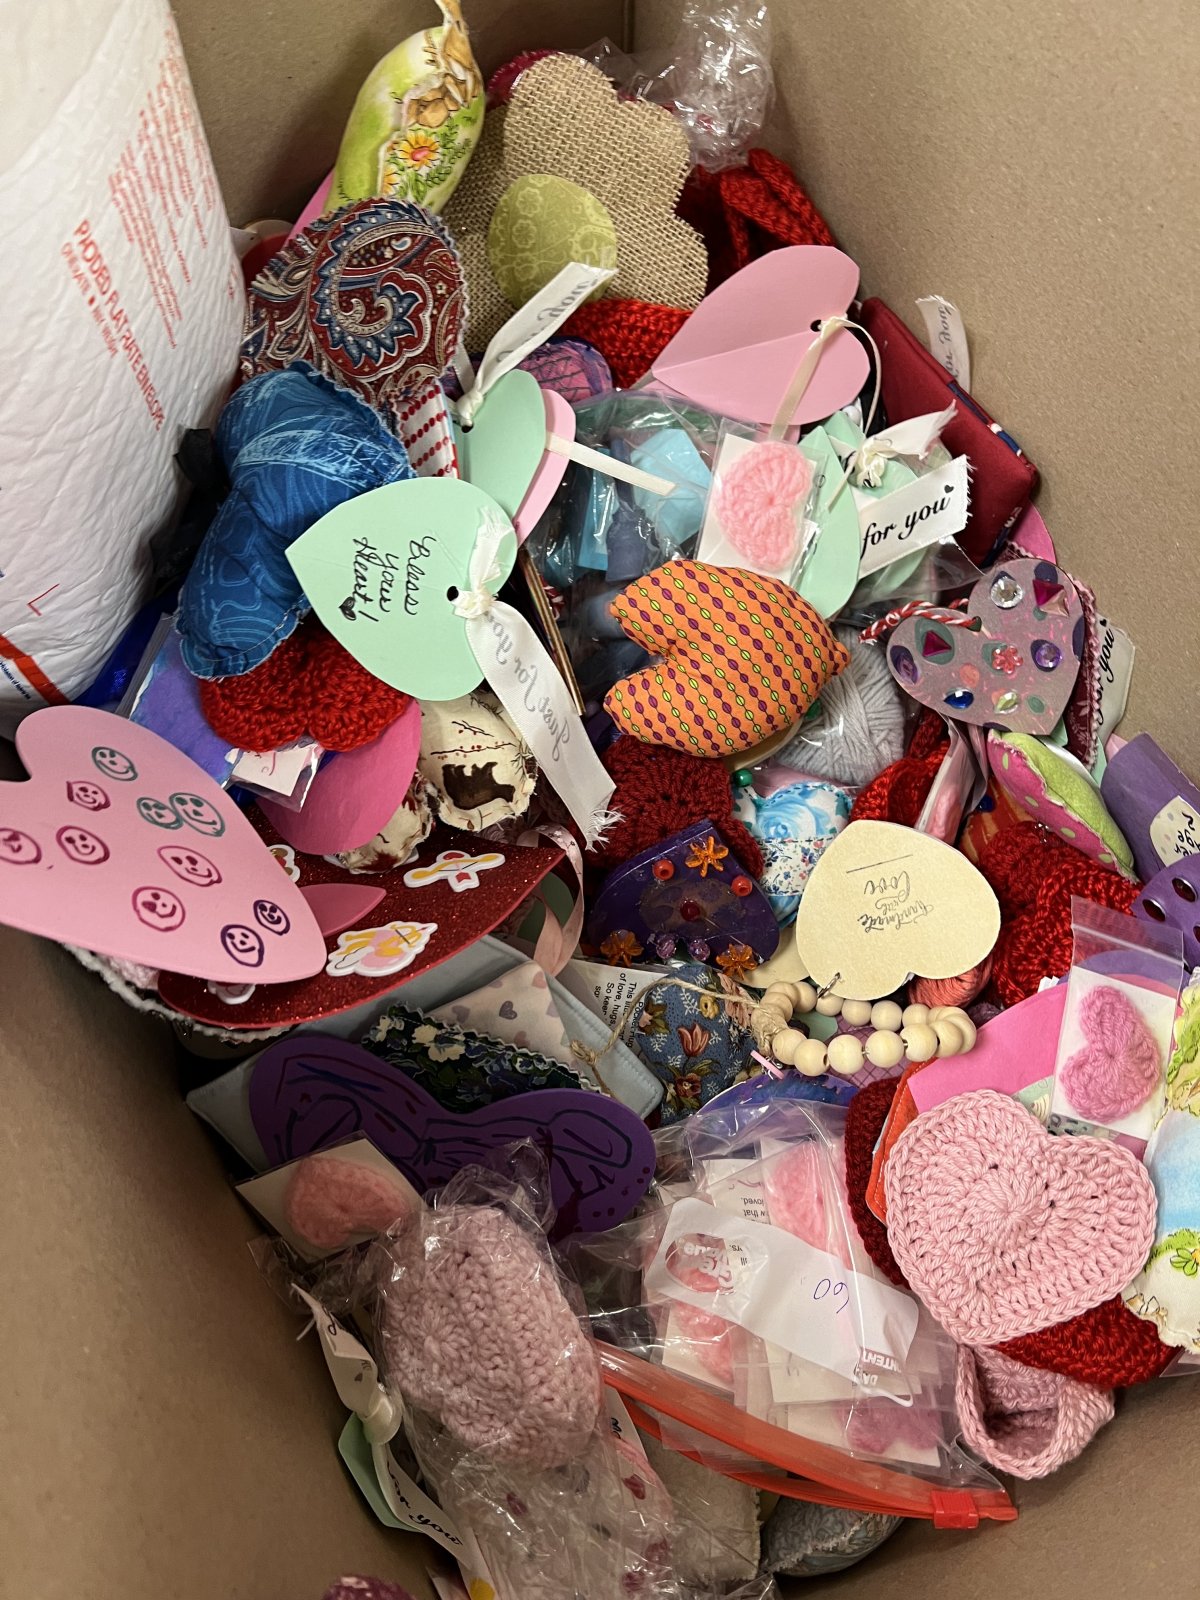 Image contains a box filled with a huge variety of handmade hearts.